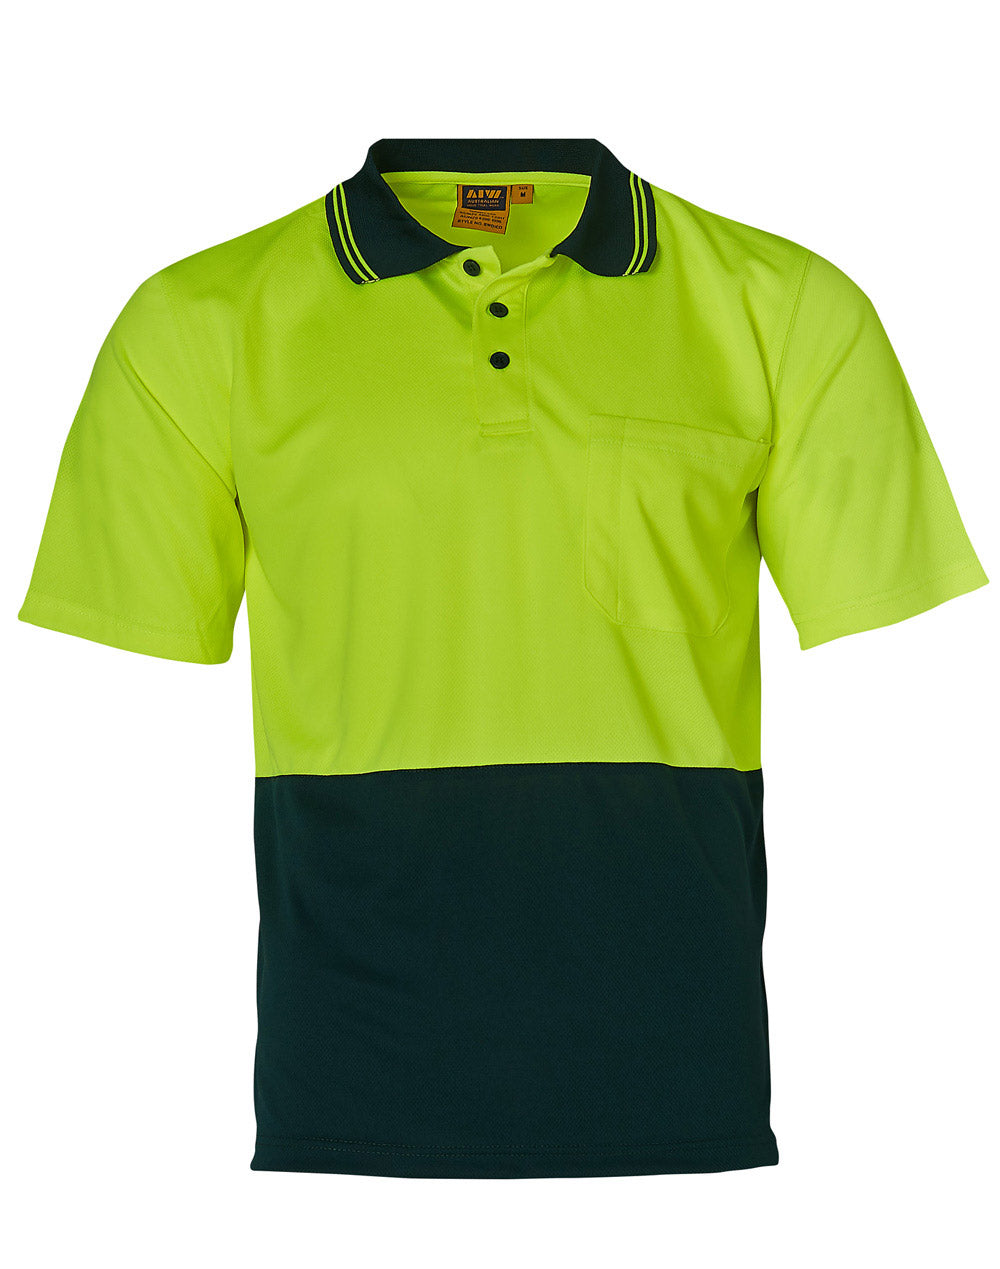 Hivis Short Sleeve Cooldry Polo - made by AIW